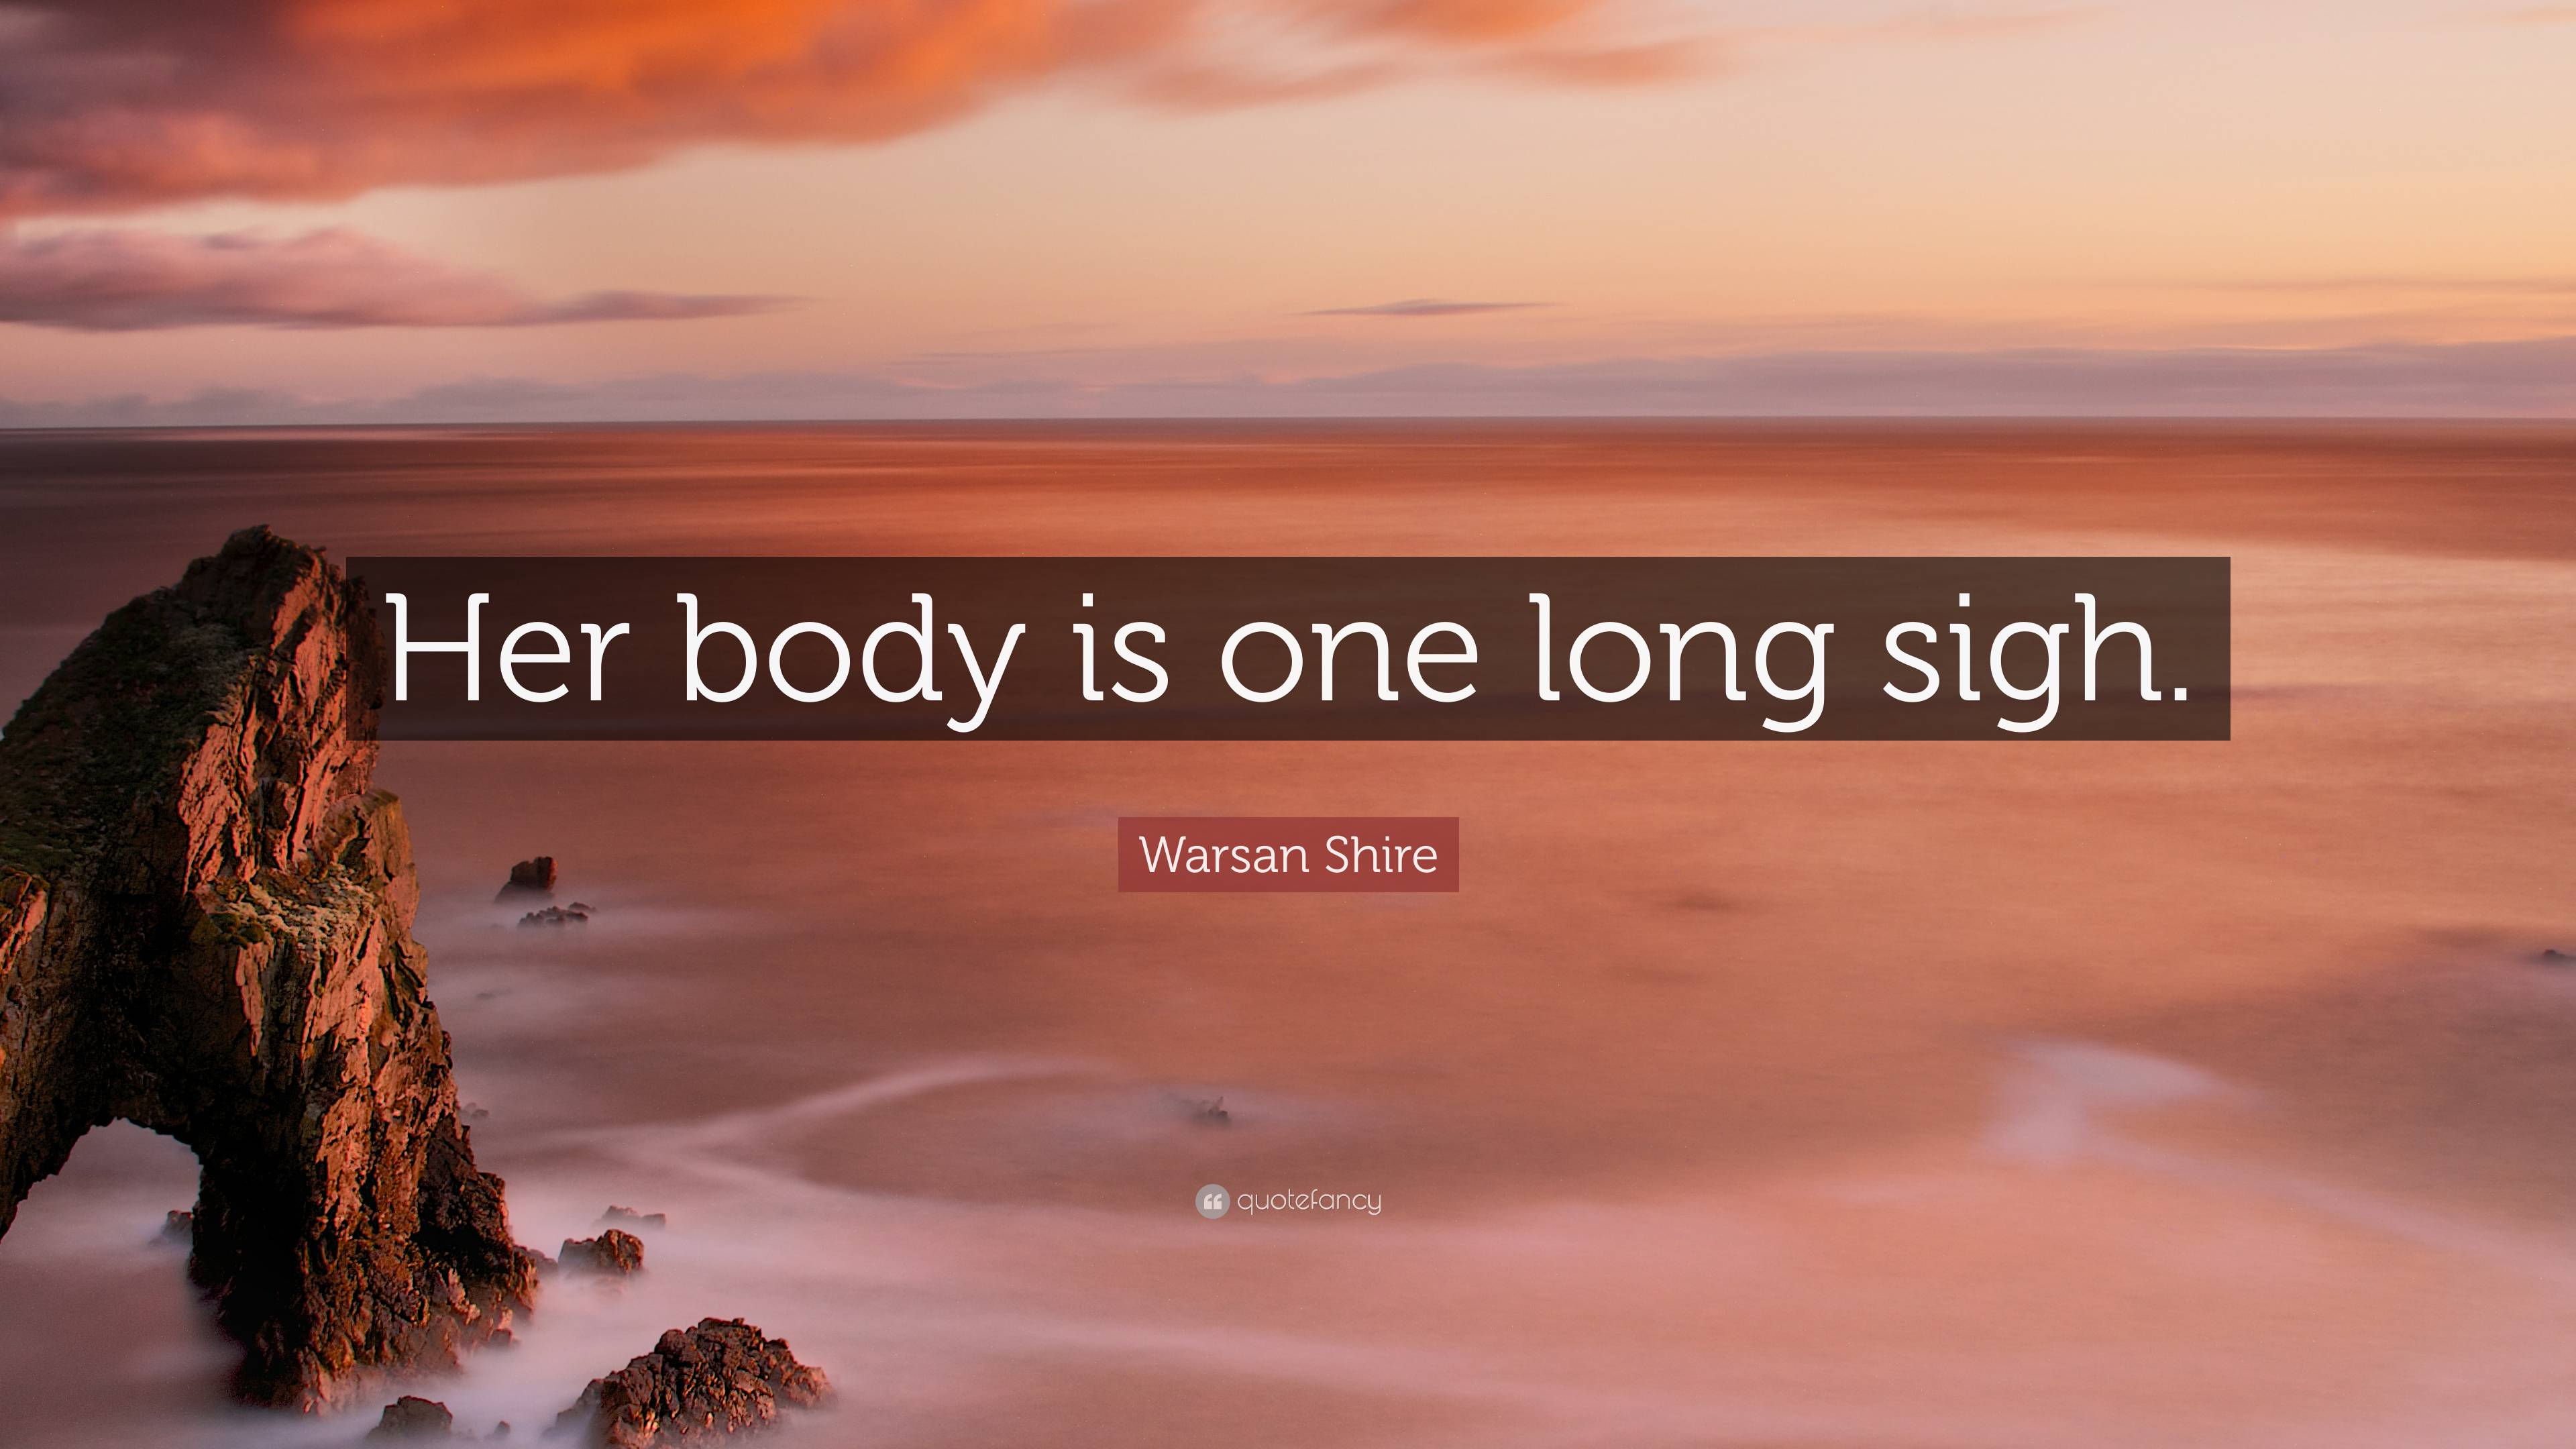 Warsan Shire Quote: “Her body is one .quotefancy.com